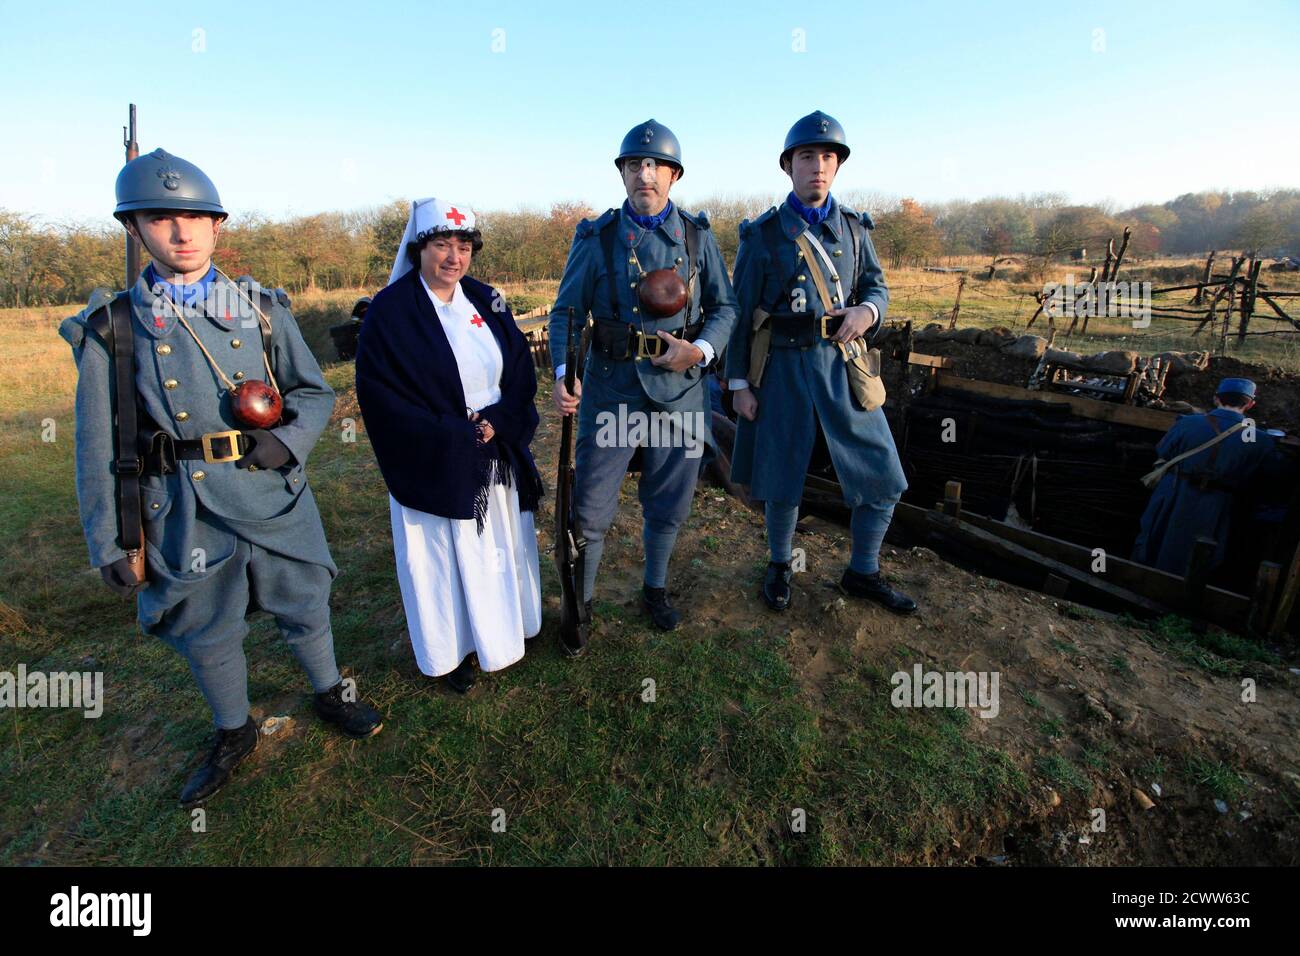 The Dubois family (L-R) Gael, Sylvaine, Dominique and Amaury, dressed in World War One French military outfits, reenact trench warfare during Armistice Day, at France's World War One military battlefield museum in Notre Dame de Lorette, Ablain Saint Nazaire, northern France November 11, 2012. REUTERS/Pascal Rosssignol (FRANCE - Tags: MILITARY ANNIVERSARY SOCIETY) Stock Photo